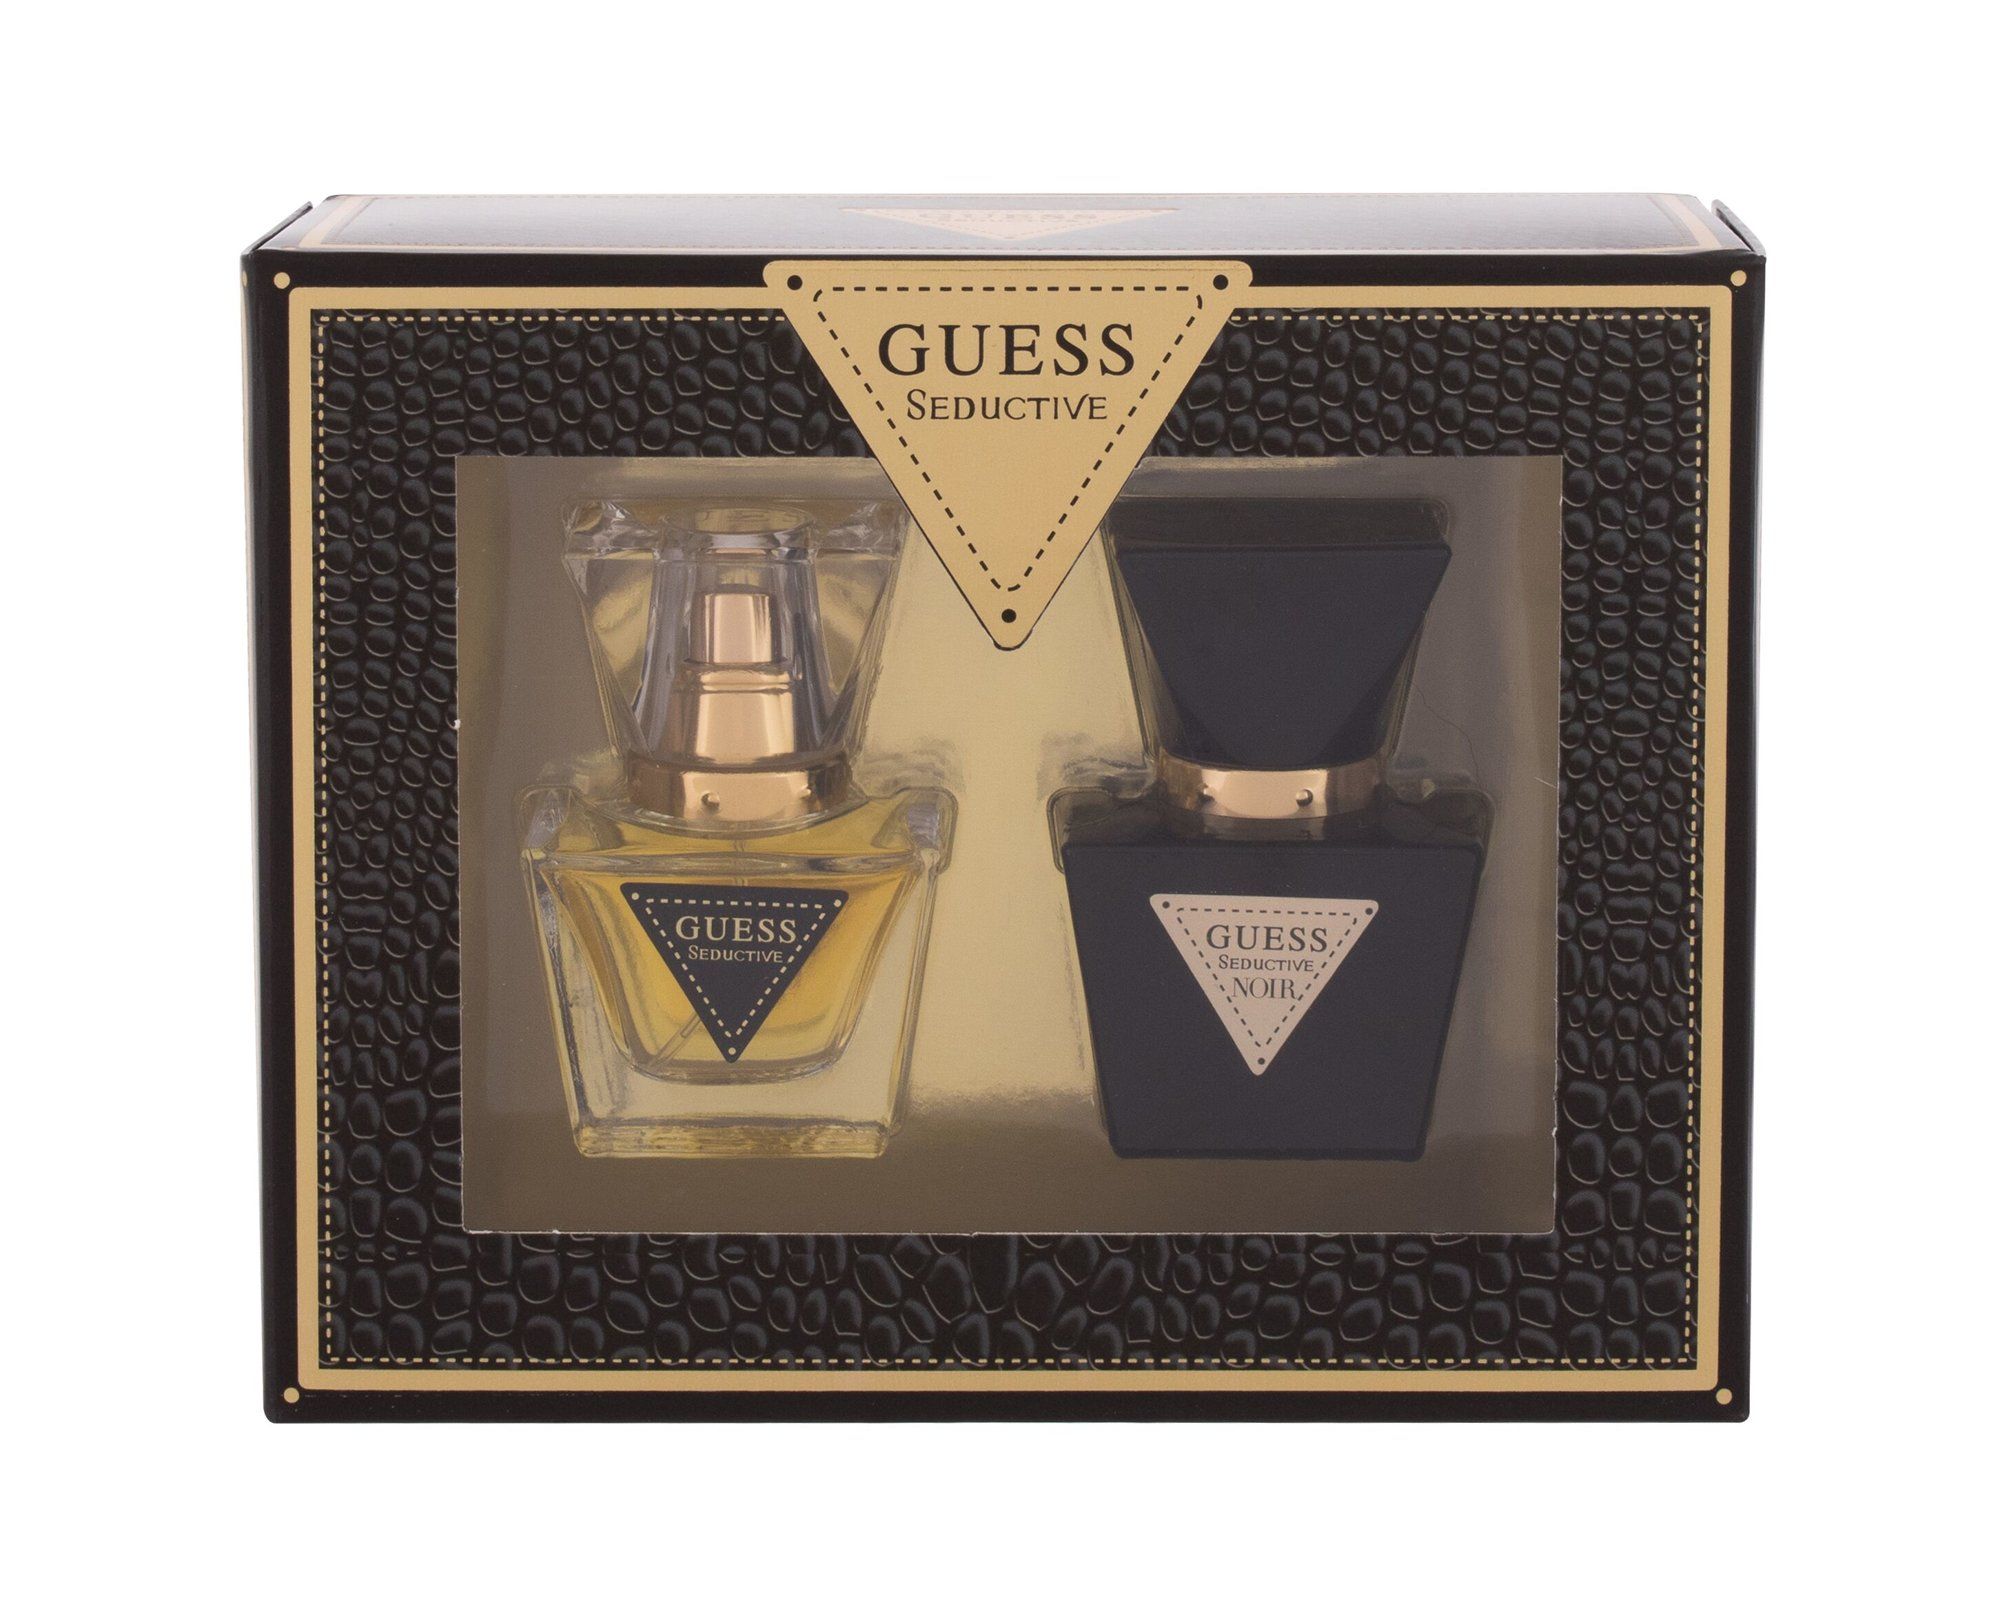 Guess Seductive 2 Piece Gift Set For Women at Ratans Online Shop - Perfumes Wholesale and Retailer Gift Set 4